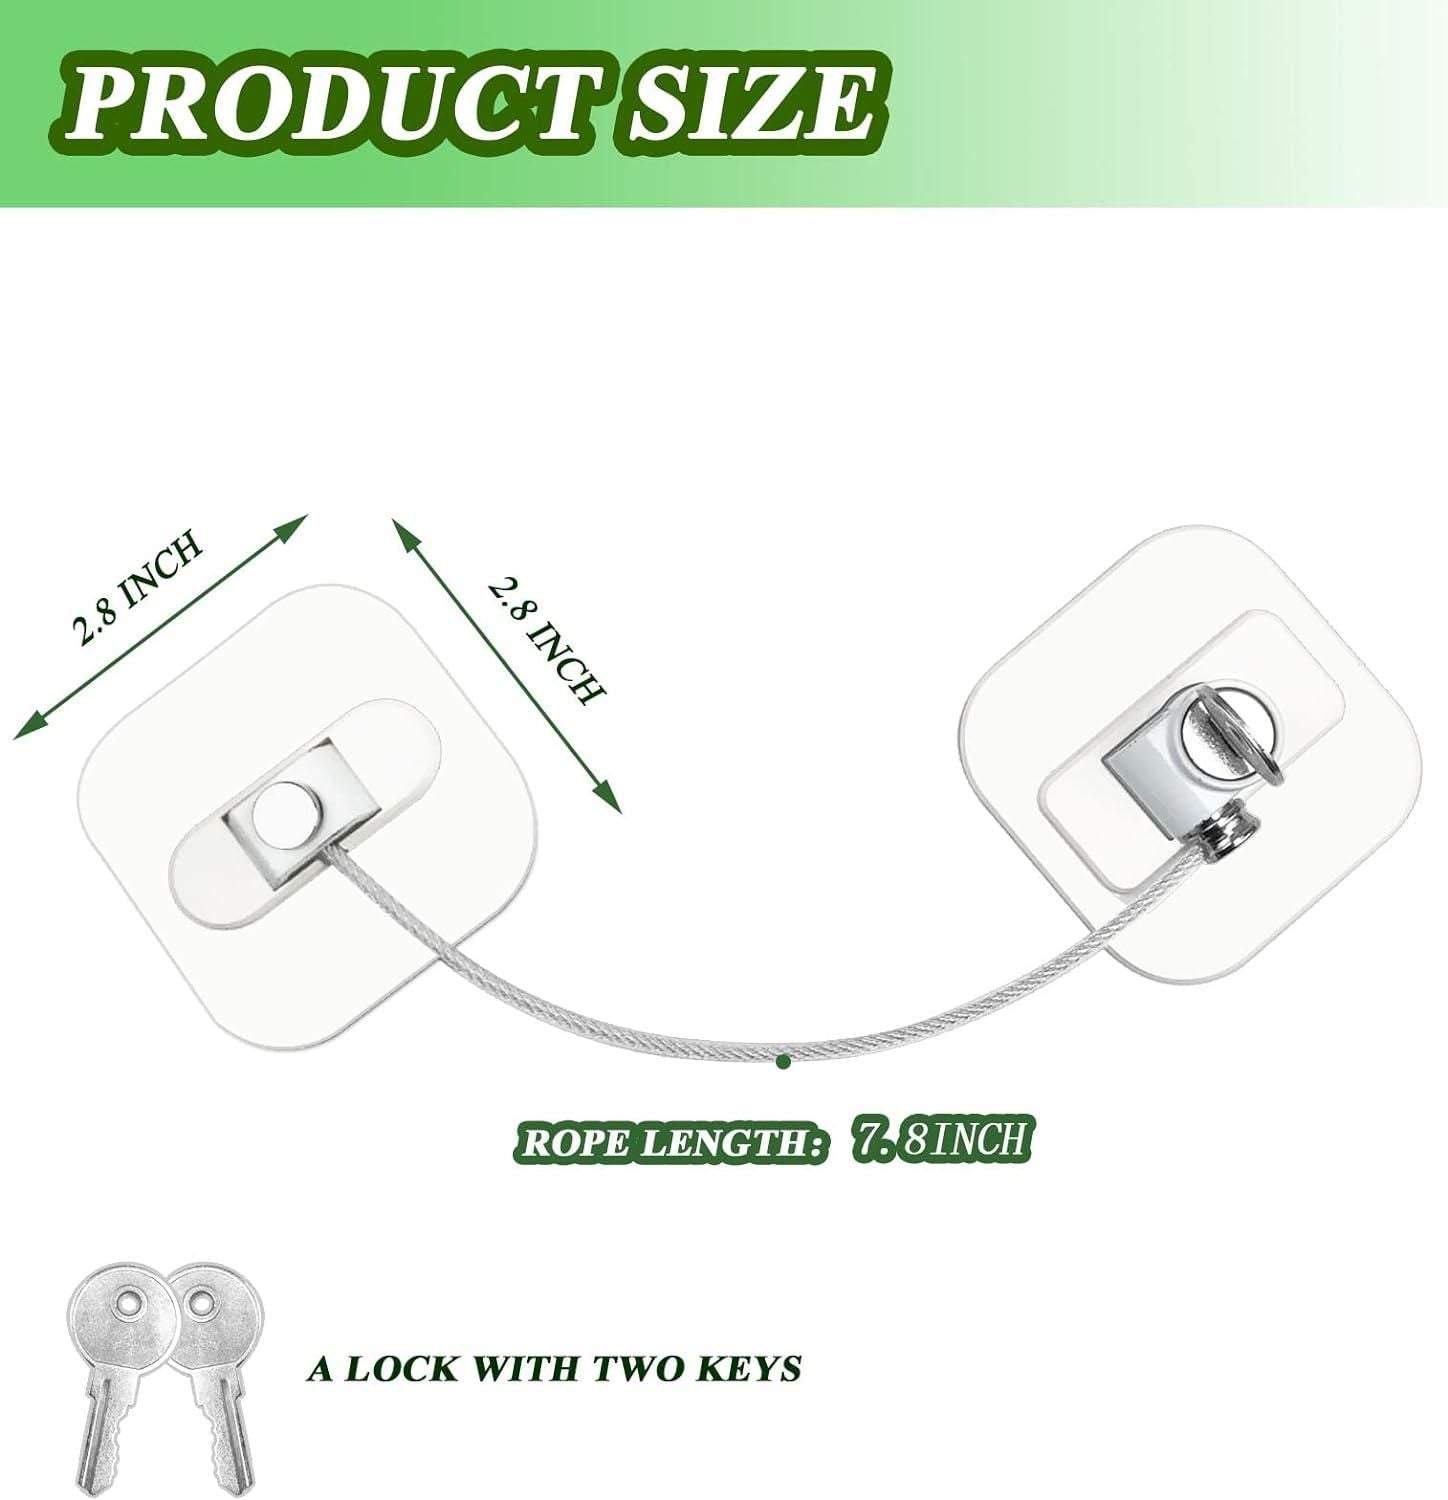 Pack of 1 Refrigerator Door Lock with Keys,Freezer Door Lock and Refrigerator Door Lock, File Drawer Lock and Child Safety Cabinet Lock for Child Proof (White)